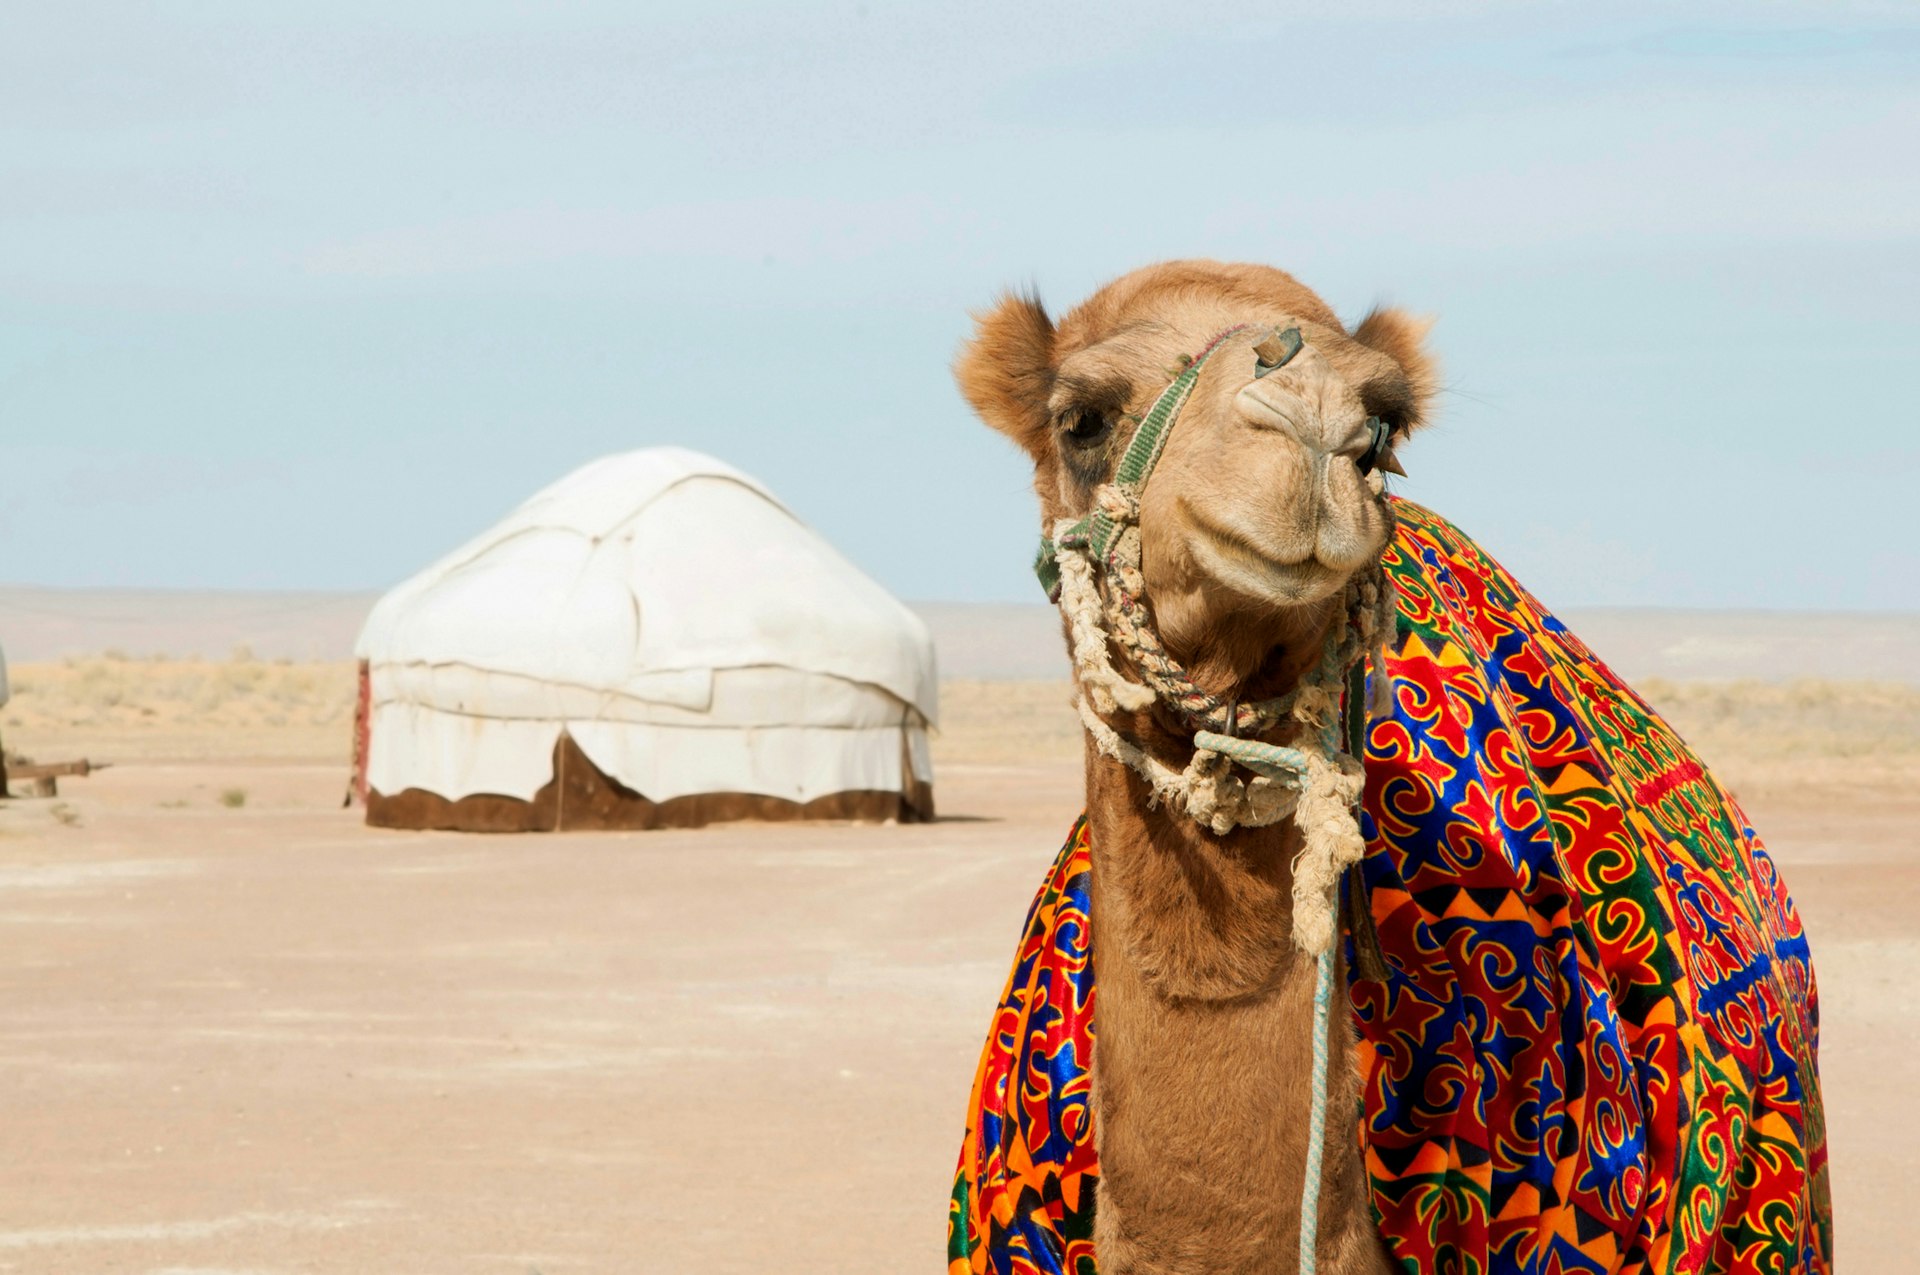 A round white yurt tent in a desert area with a large camel in front 